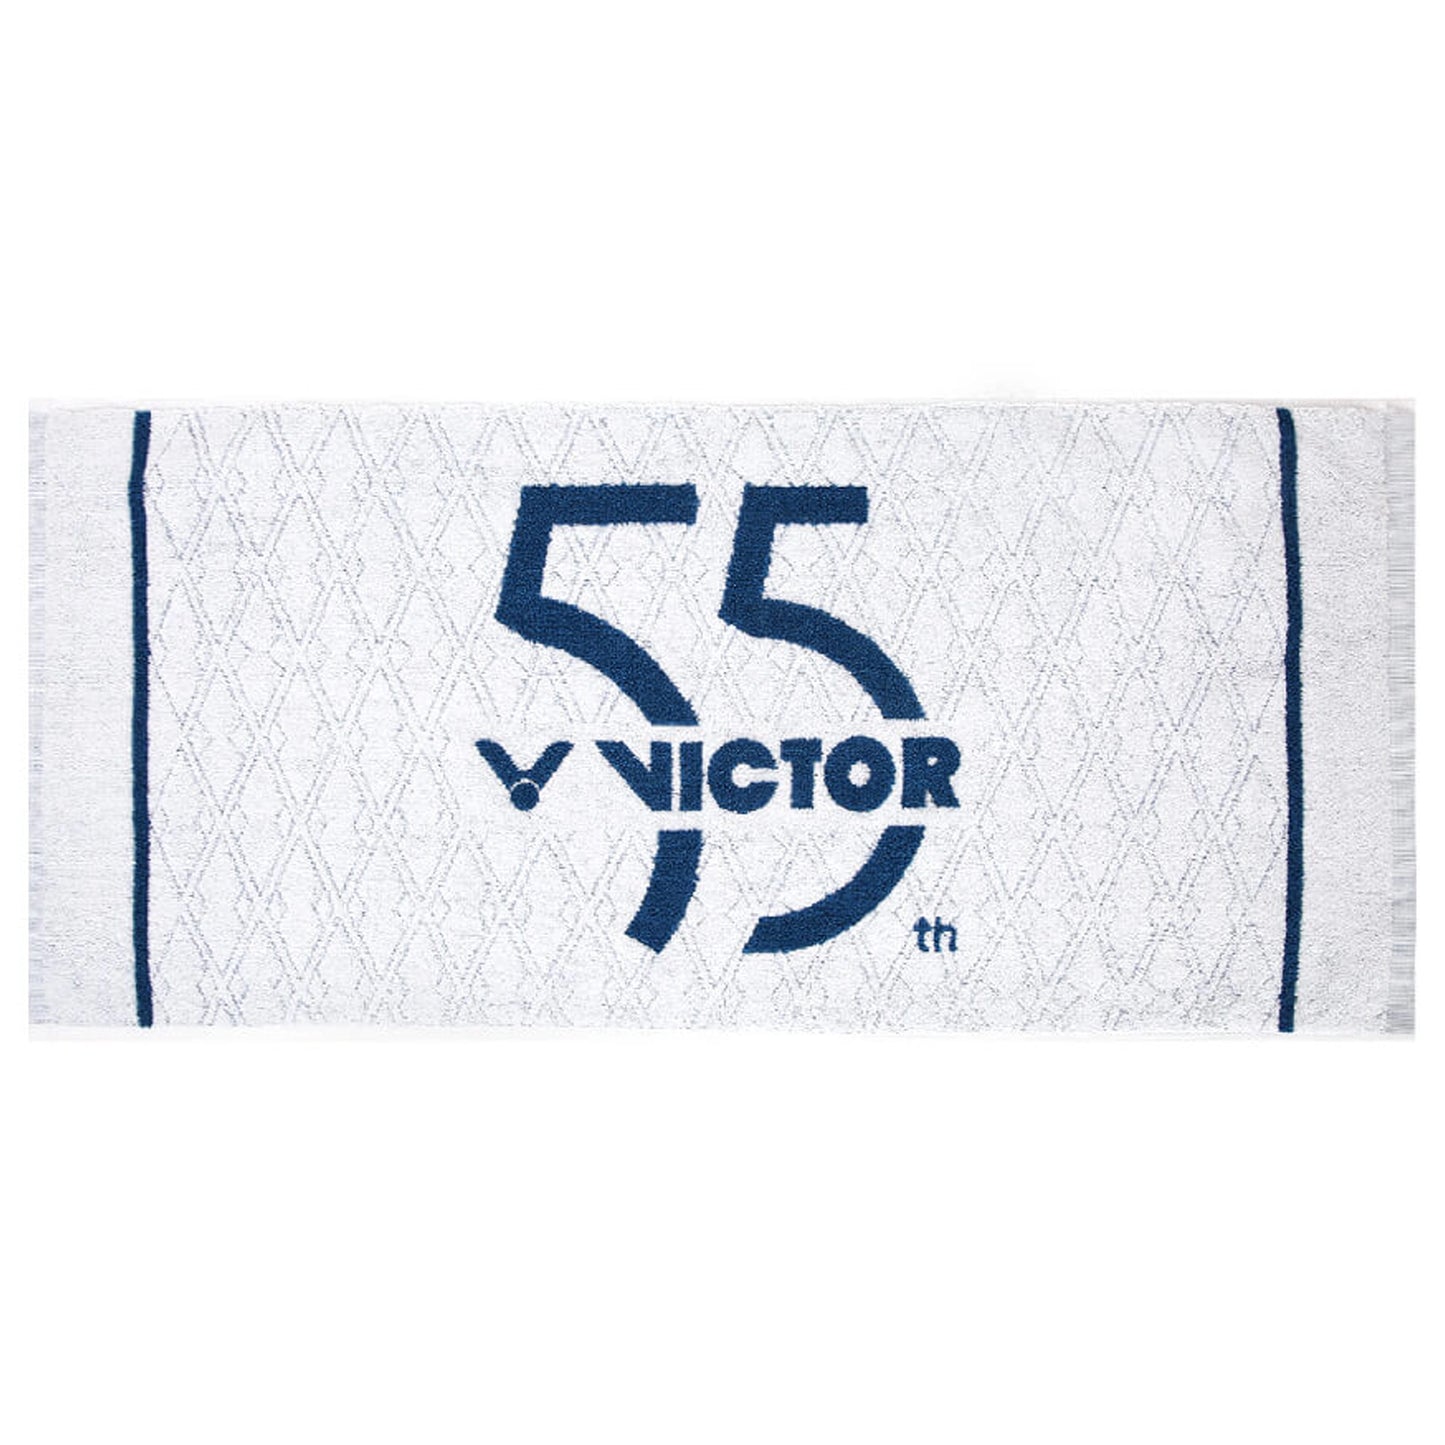 Victor 55th Anniversary Towel - White (TW55A)